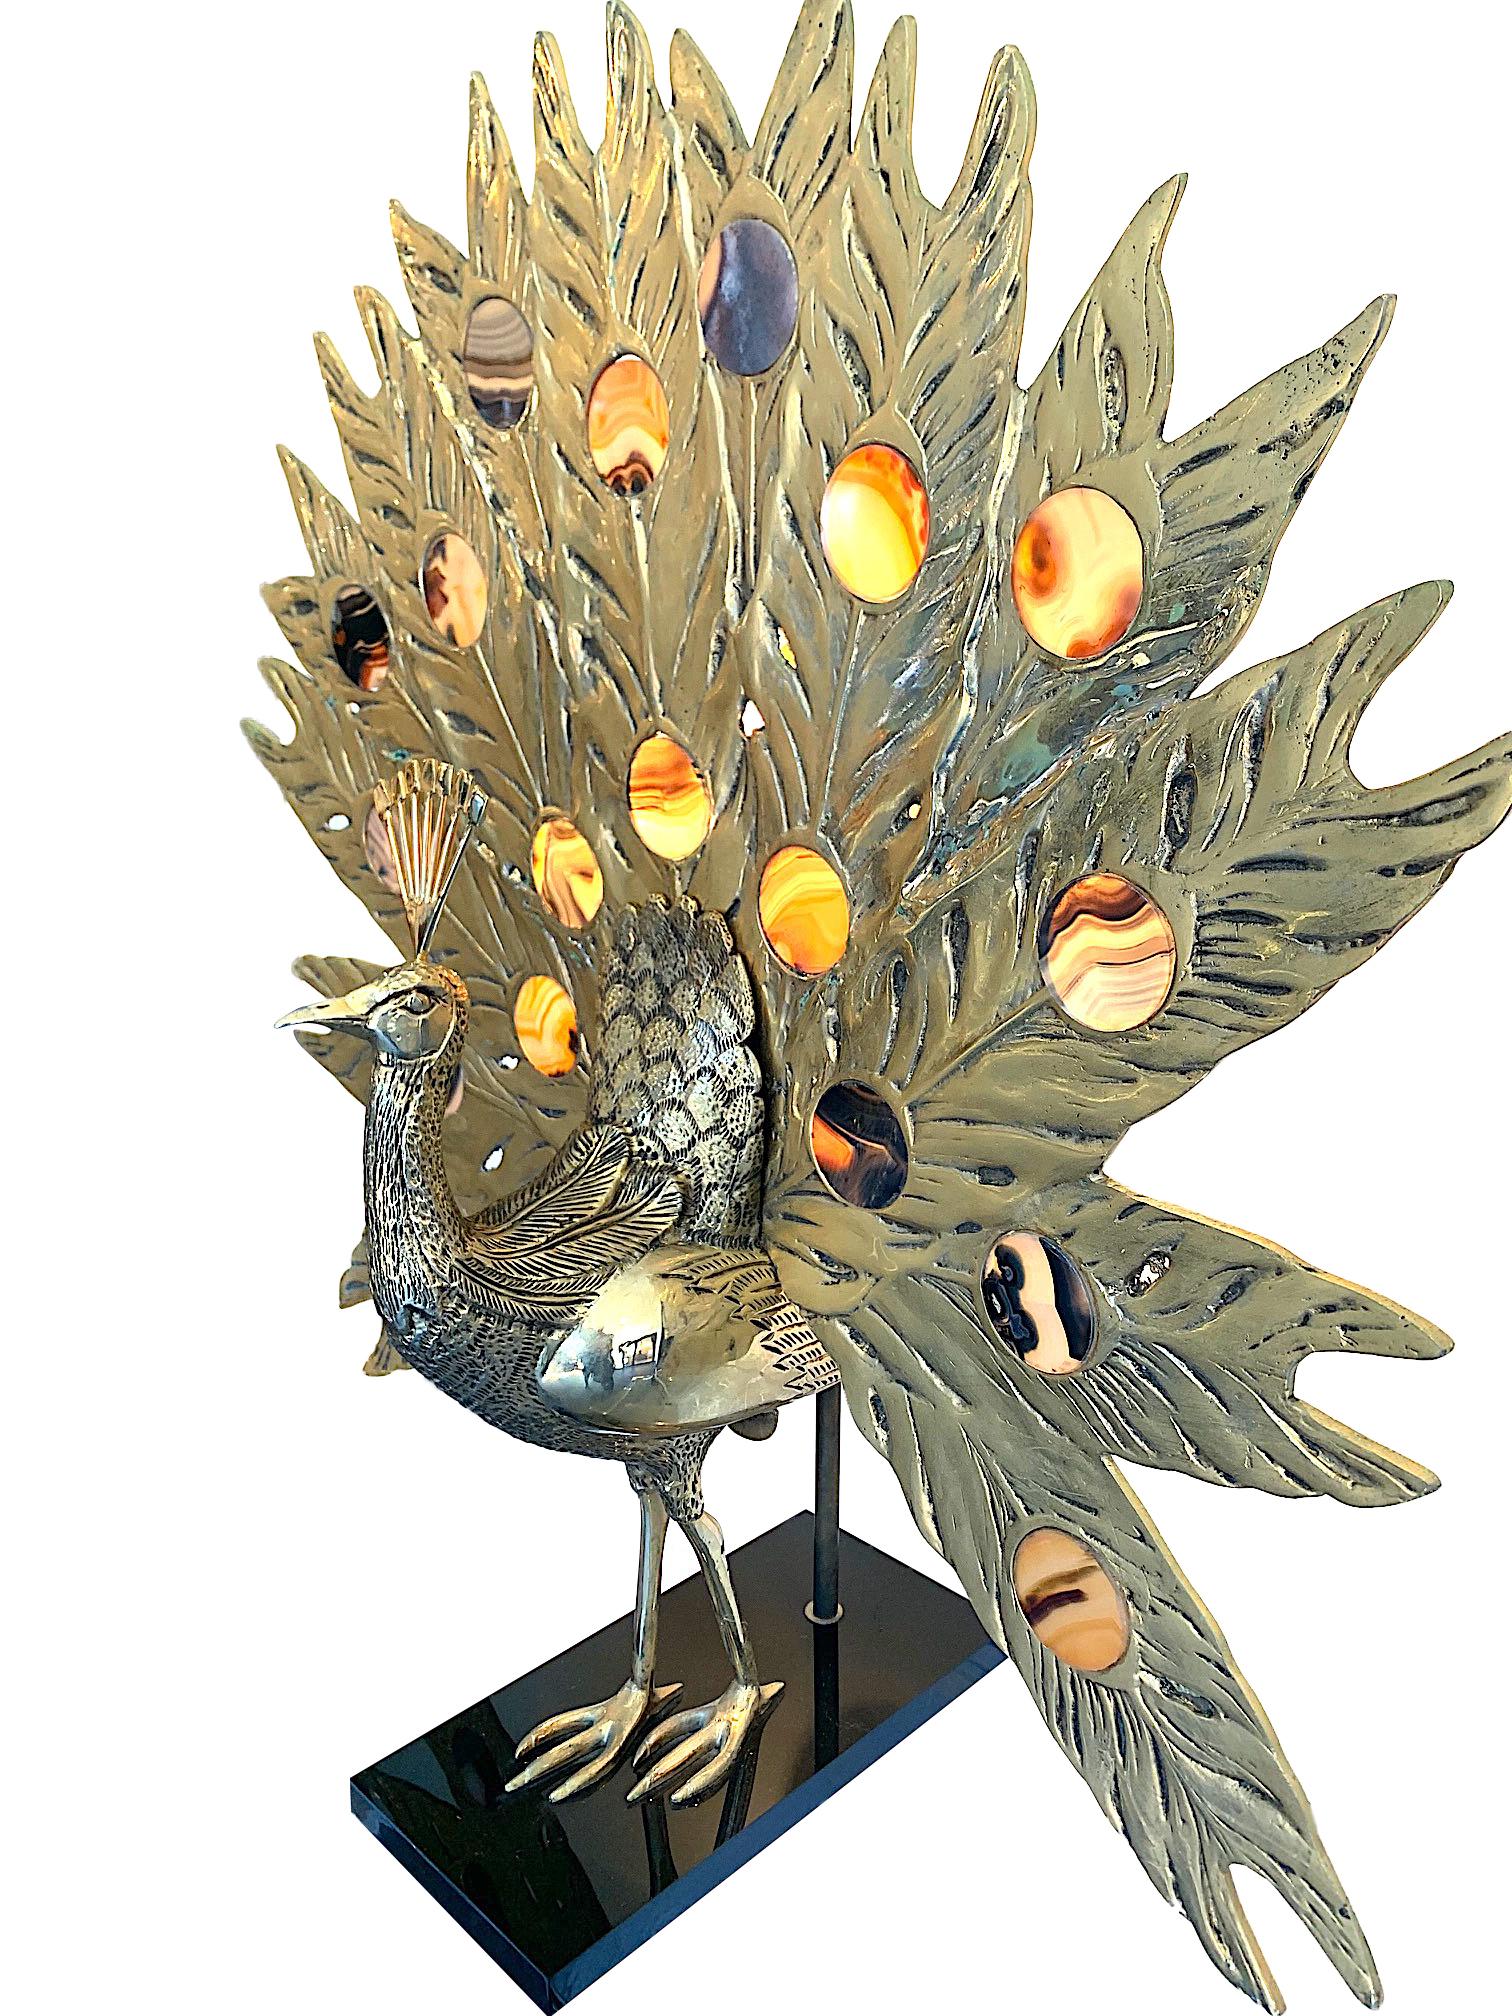 Stunning Rare Large Brass Peacock Lamp with Agate Backlit Tail by Fondica  4